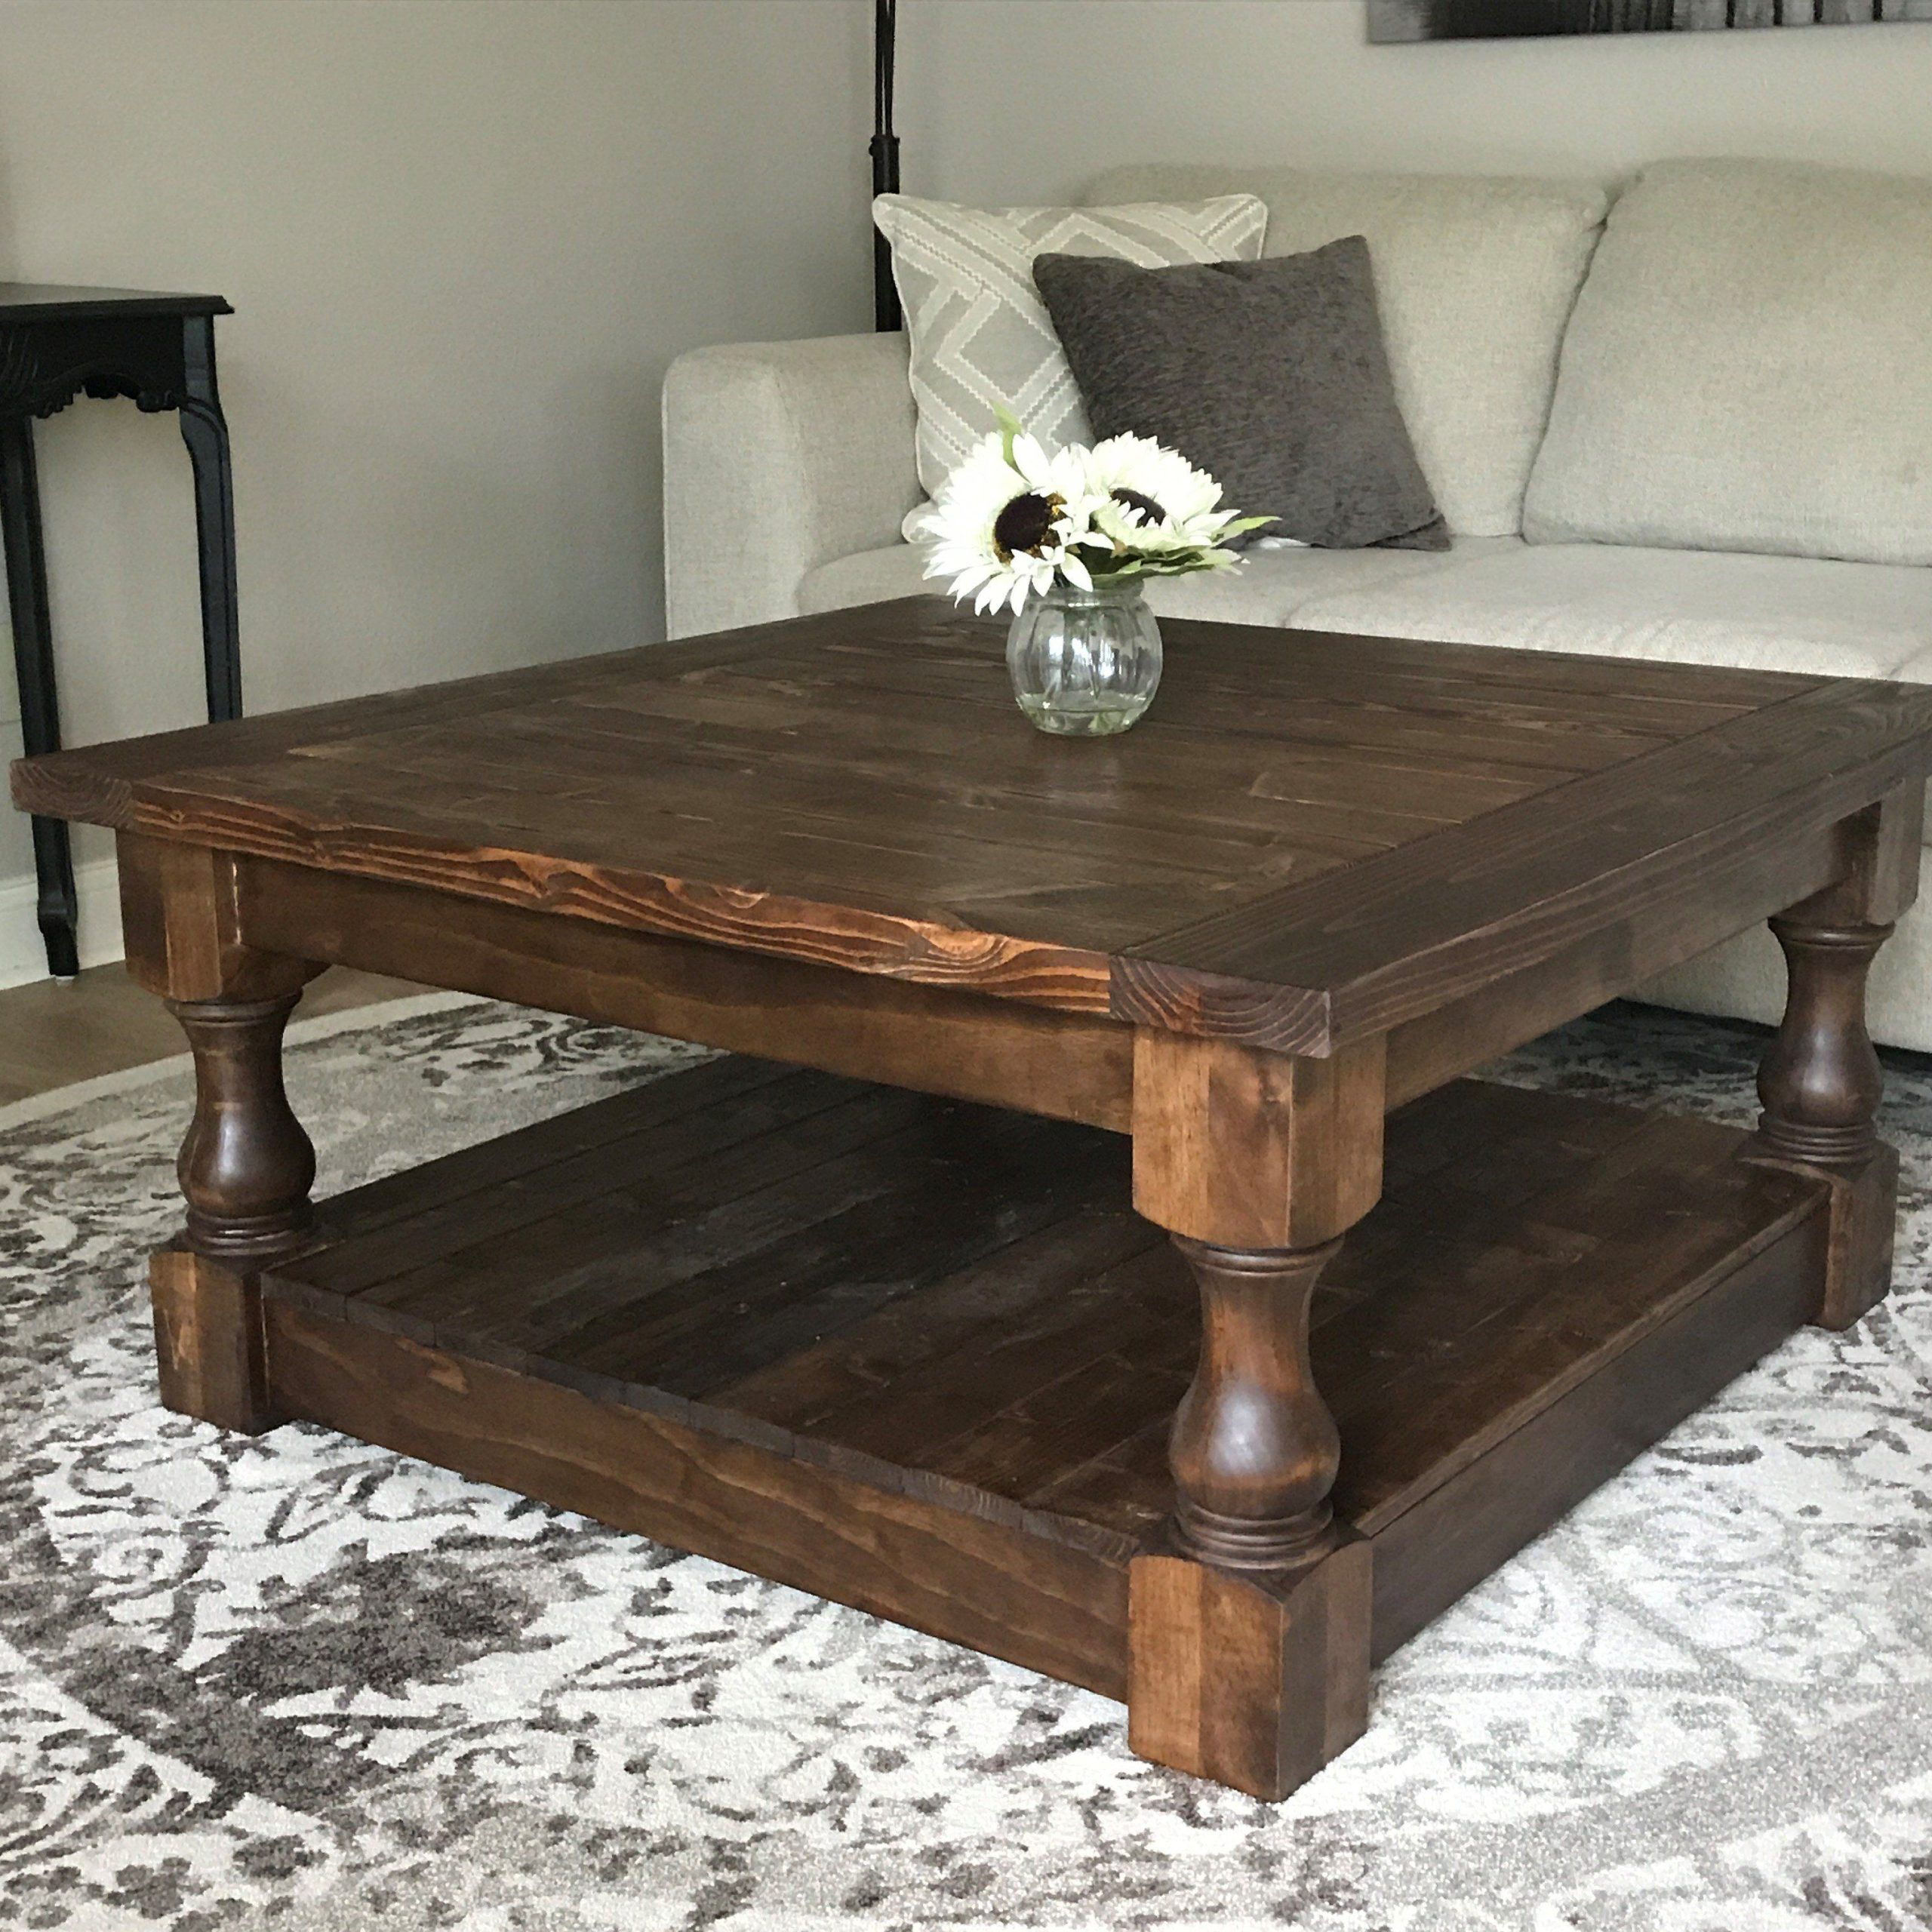 10+ Rustic Coffee Table Decor – Decoomo Throughout Best And Newest Brown Rustic Coffee Tables (View 13 of 15)